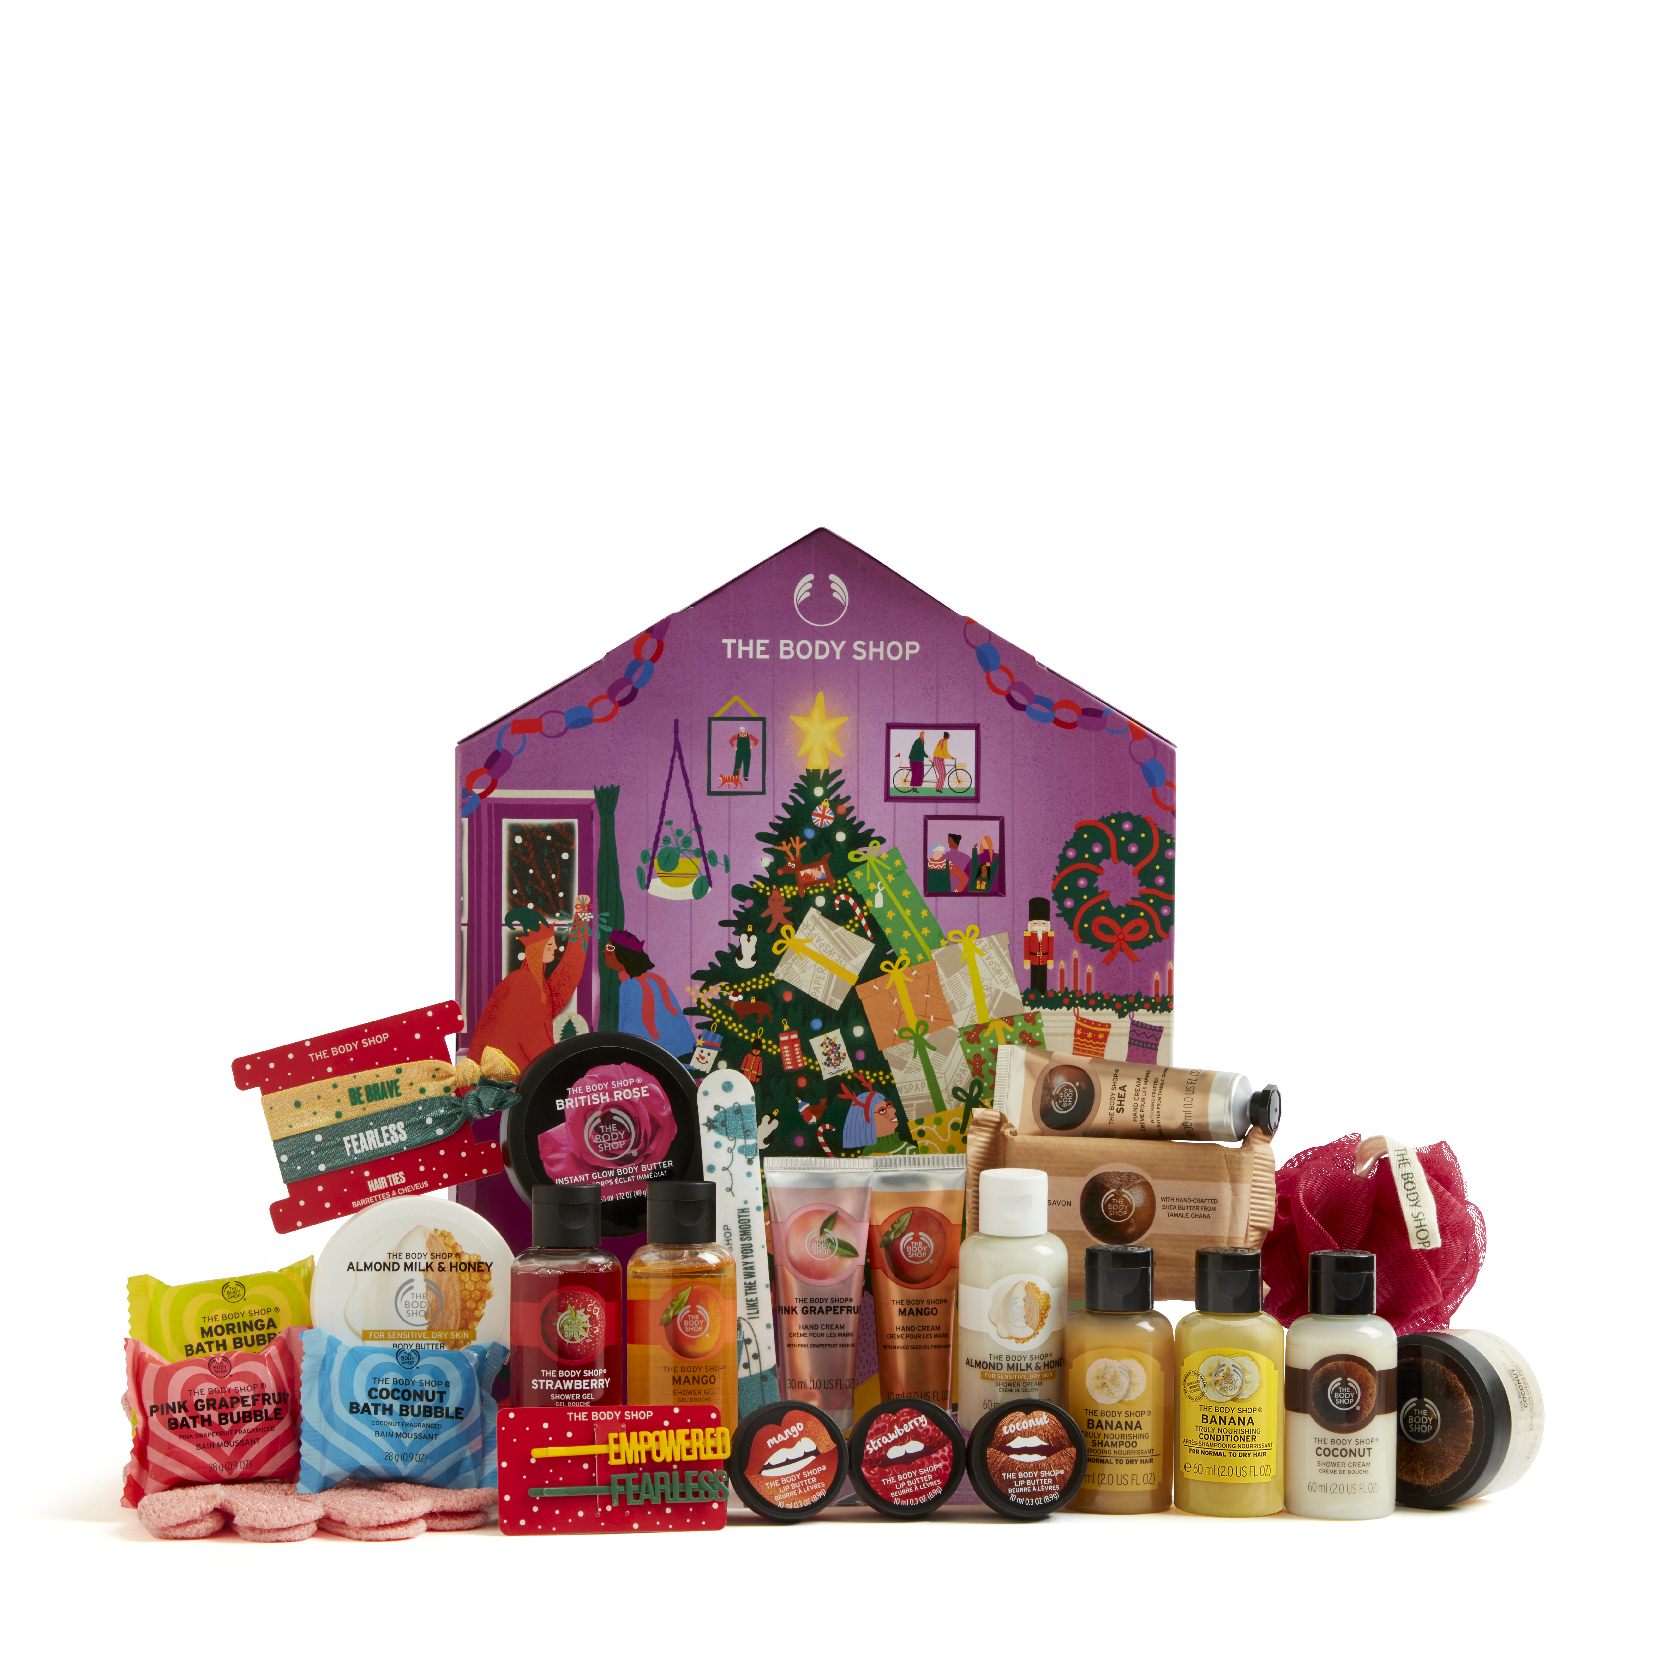 The Body Shop Make It Real Together Advent Calendar £50 closed with